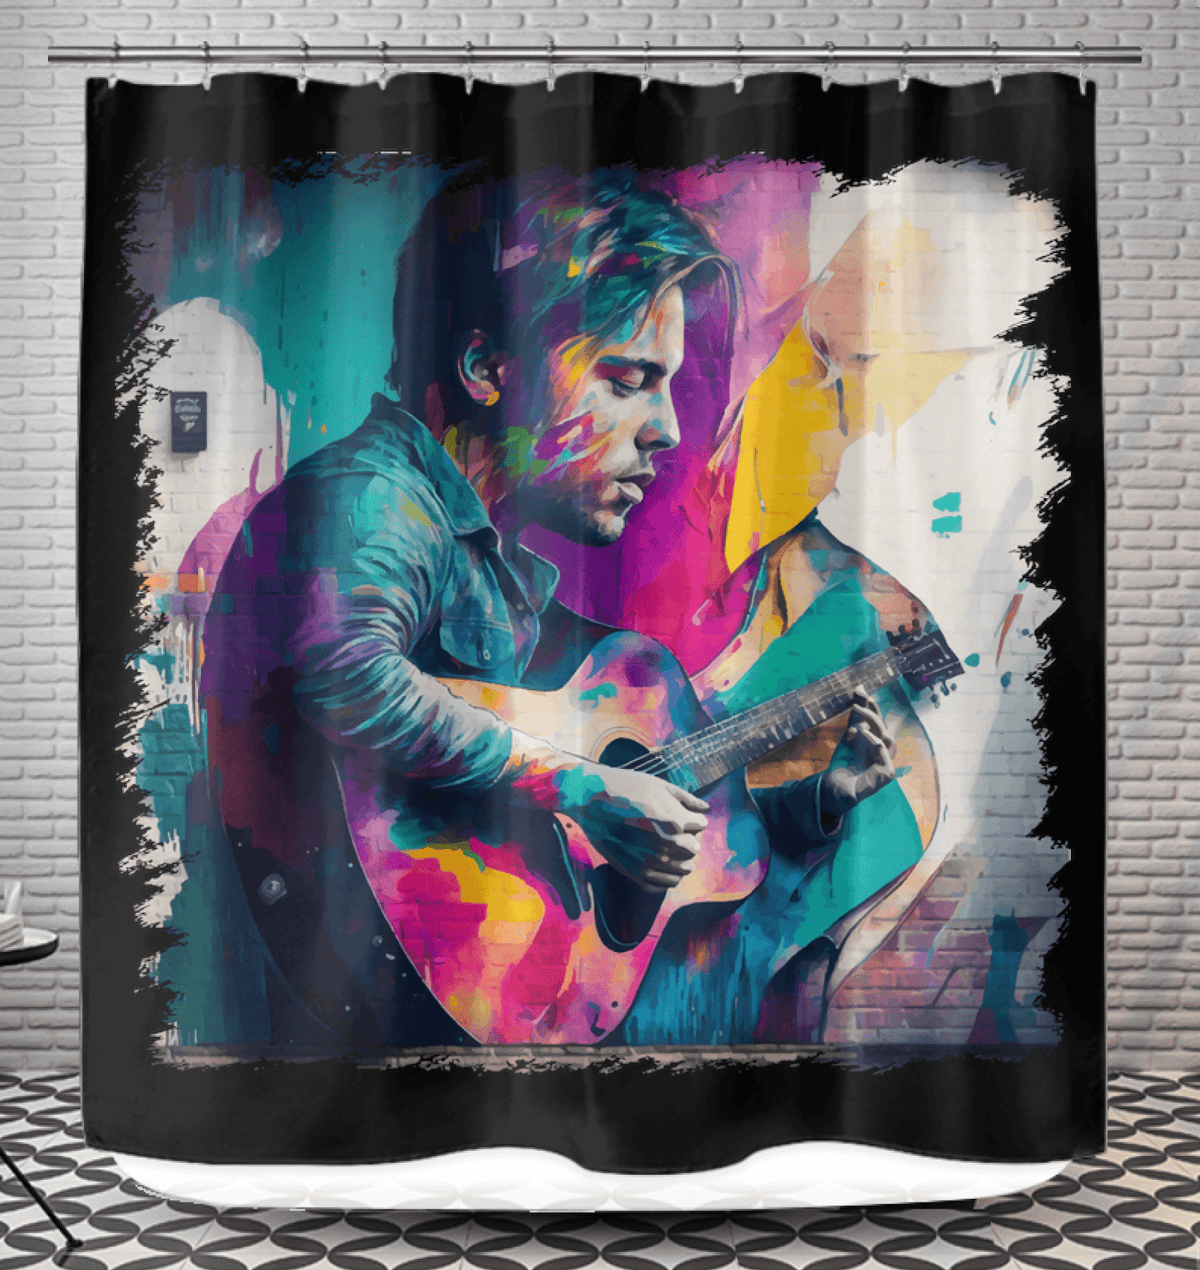 Taking Music to Infinity Shower Curtain - Beyond T-shirts